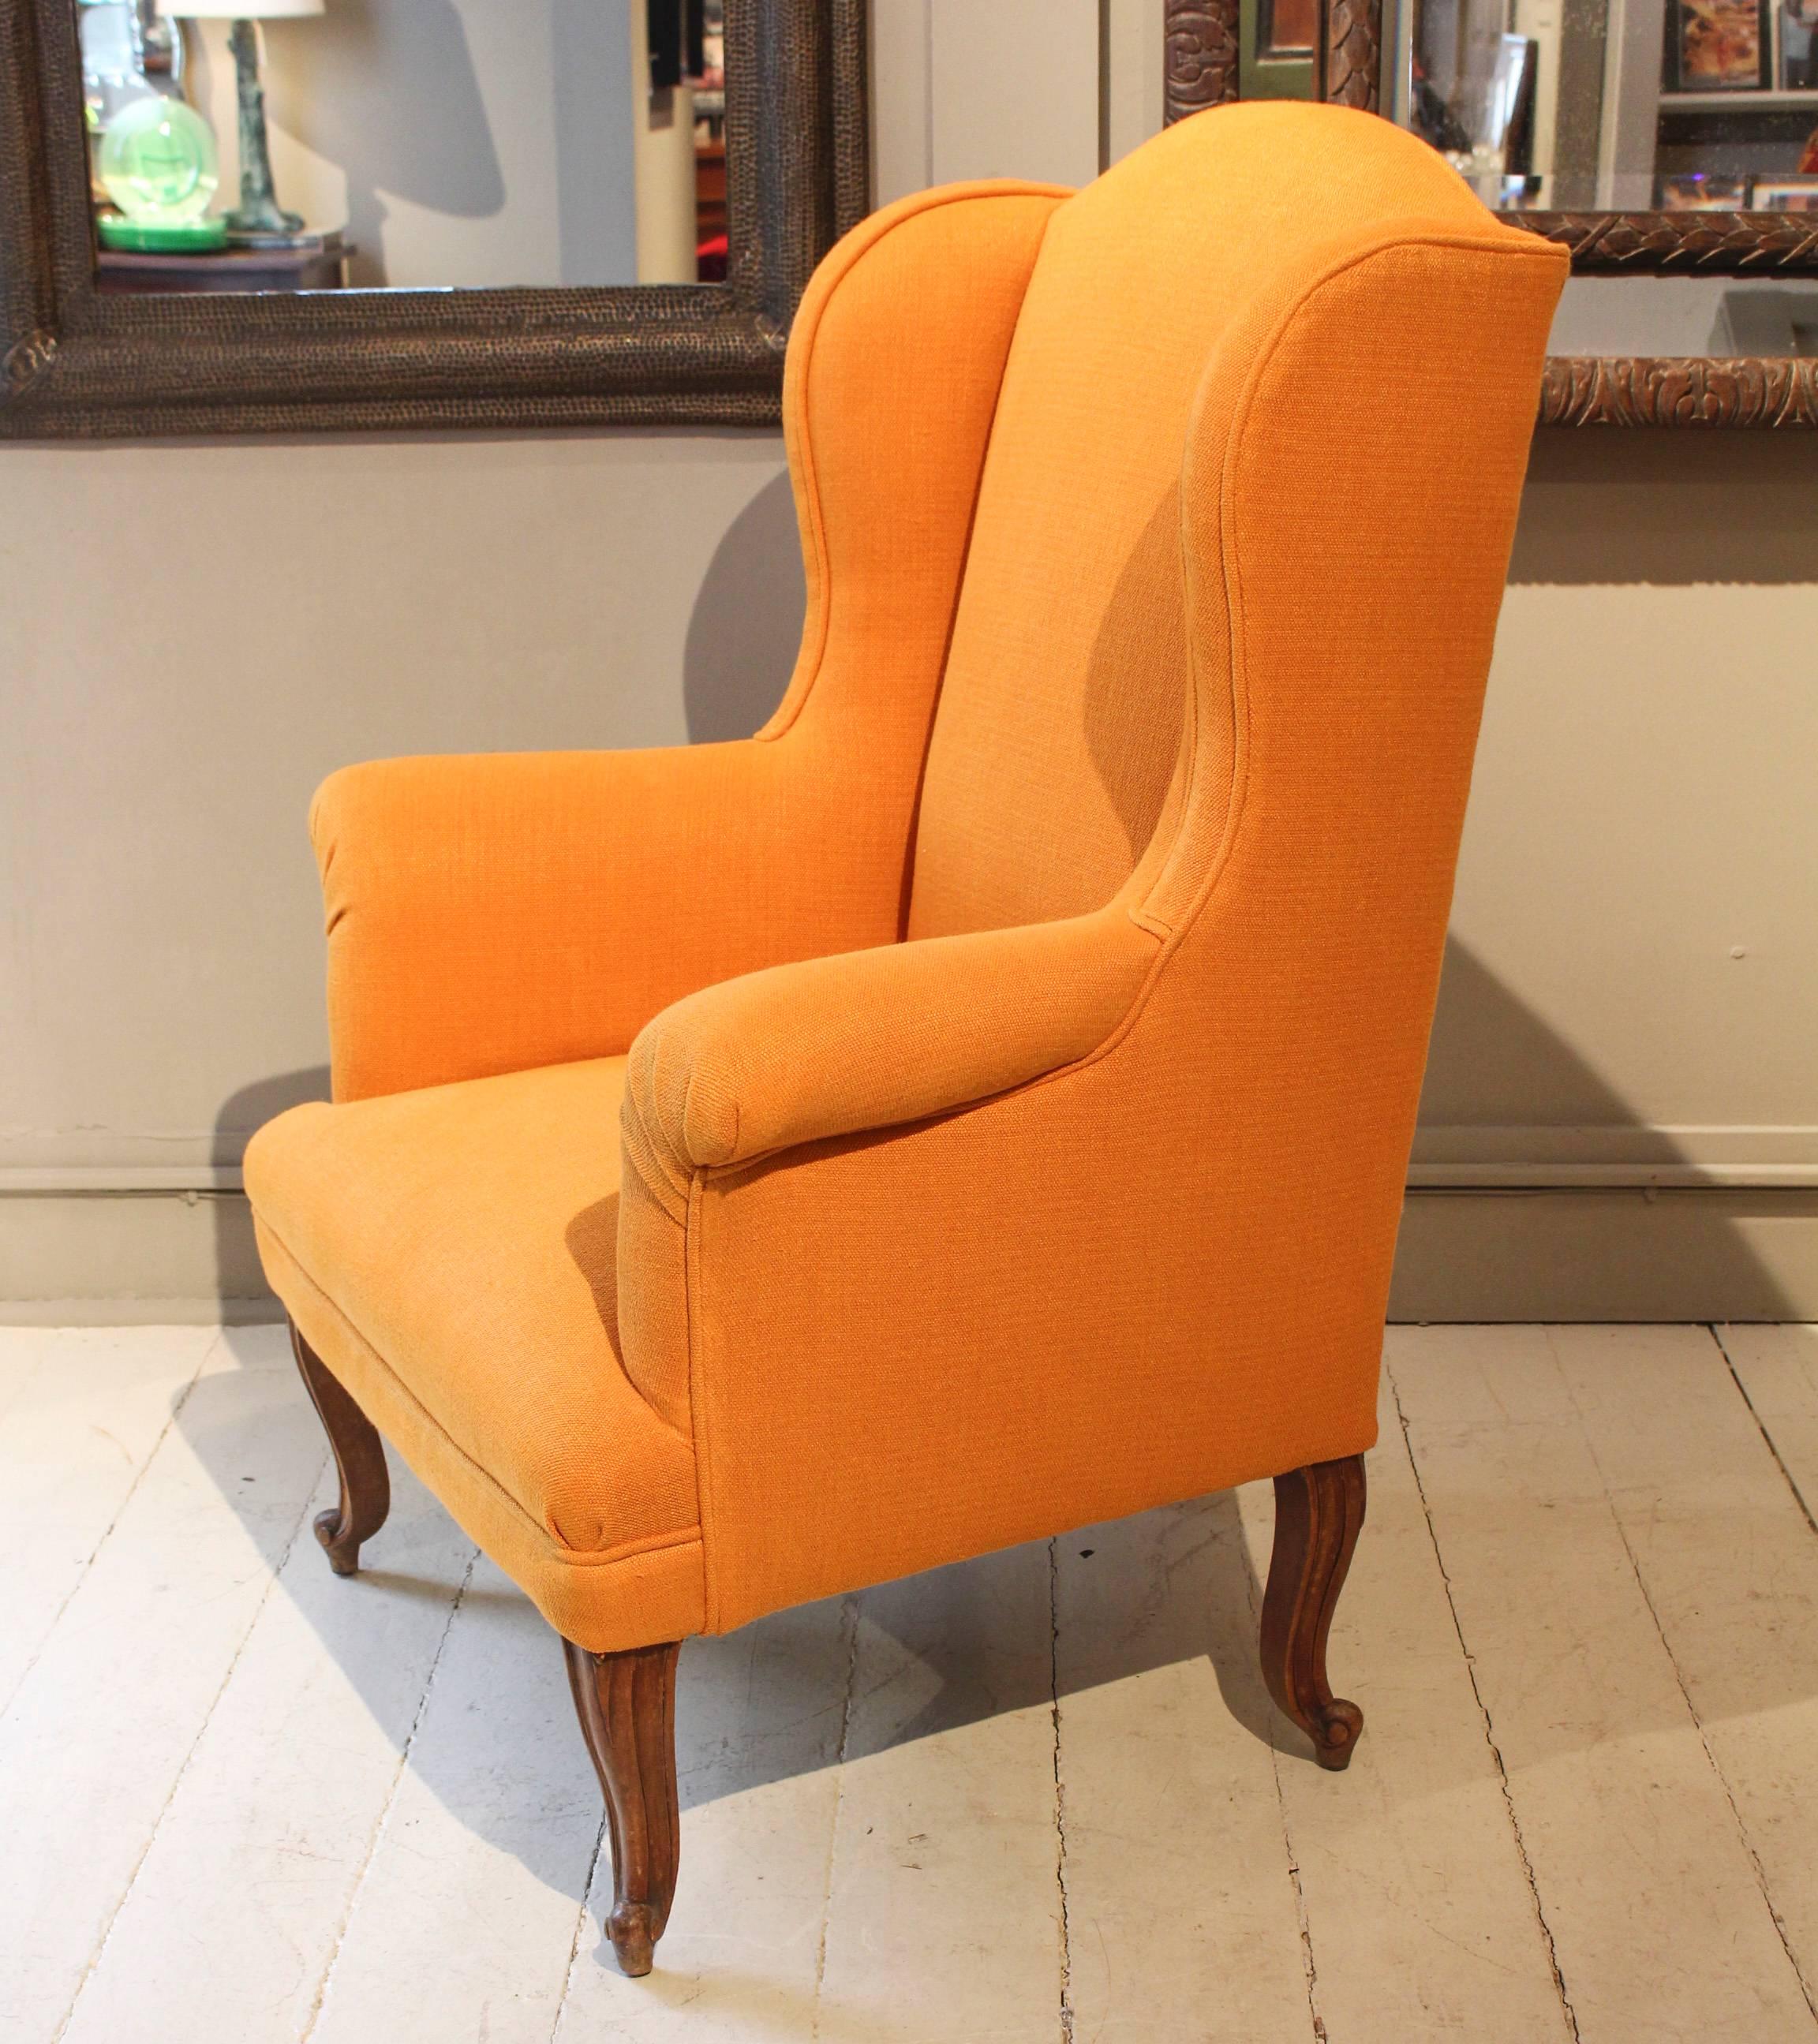 Petite Wingback Chair, 19th c France, Detailed with Unusual Boxed Wings.  Chair is Raised on Graceful Cabriole Legs and Newly Upholstered in a Saturated Saffron-Colored  Rogers & Goffigon Linen.